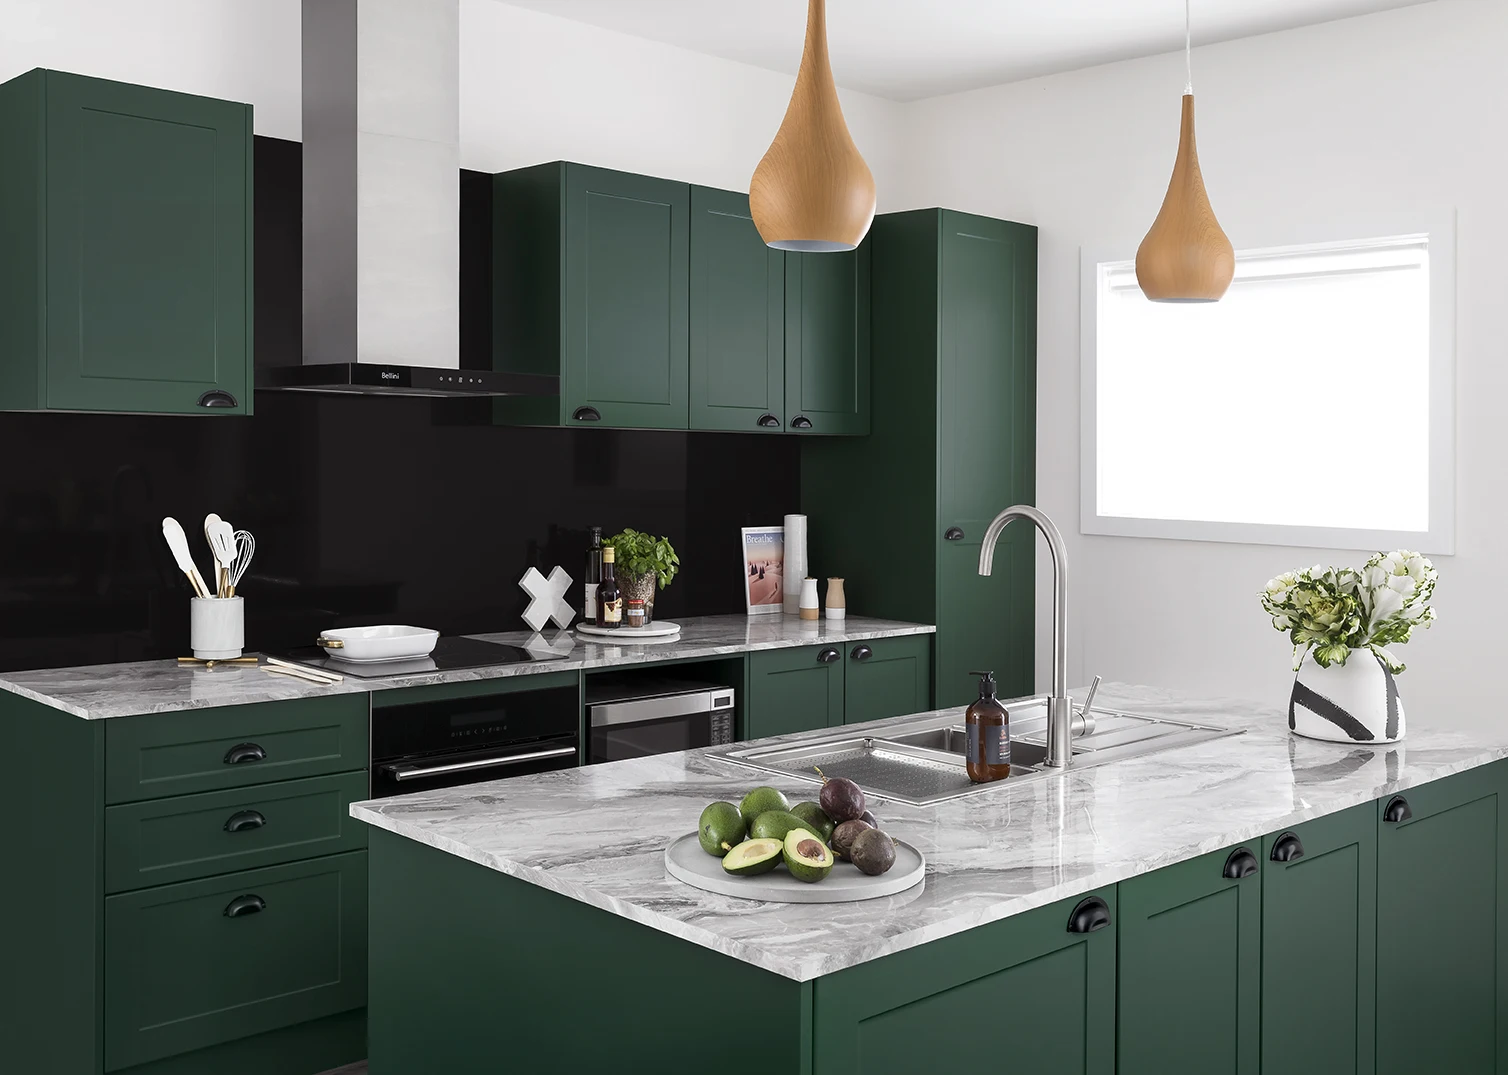 Vermonhouzz Hot Selling Green Kitchen Cabinet With Shaker Door Style Designs Modern For Villa Buy Green Kitchen Cabinet Kitchen Cabinet Shaker Kitchen Cabinet Designs Modern Product On Alibaba Com